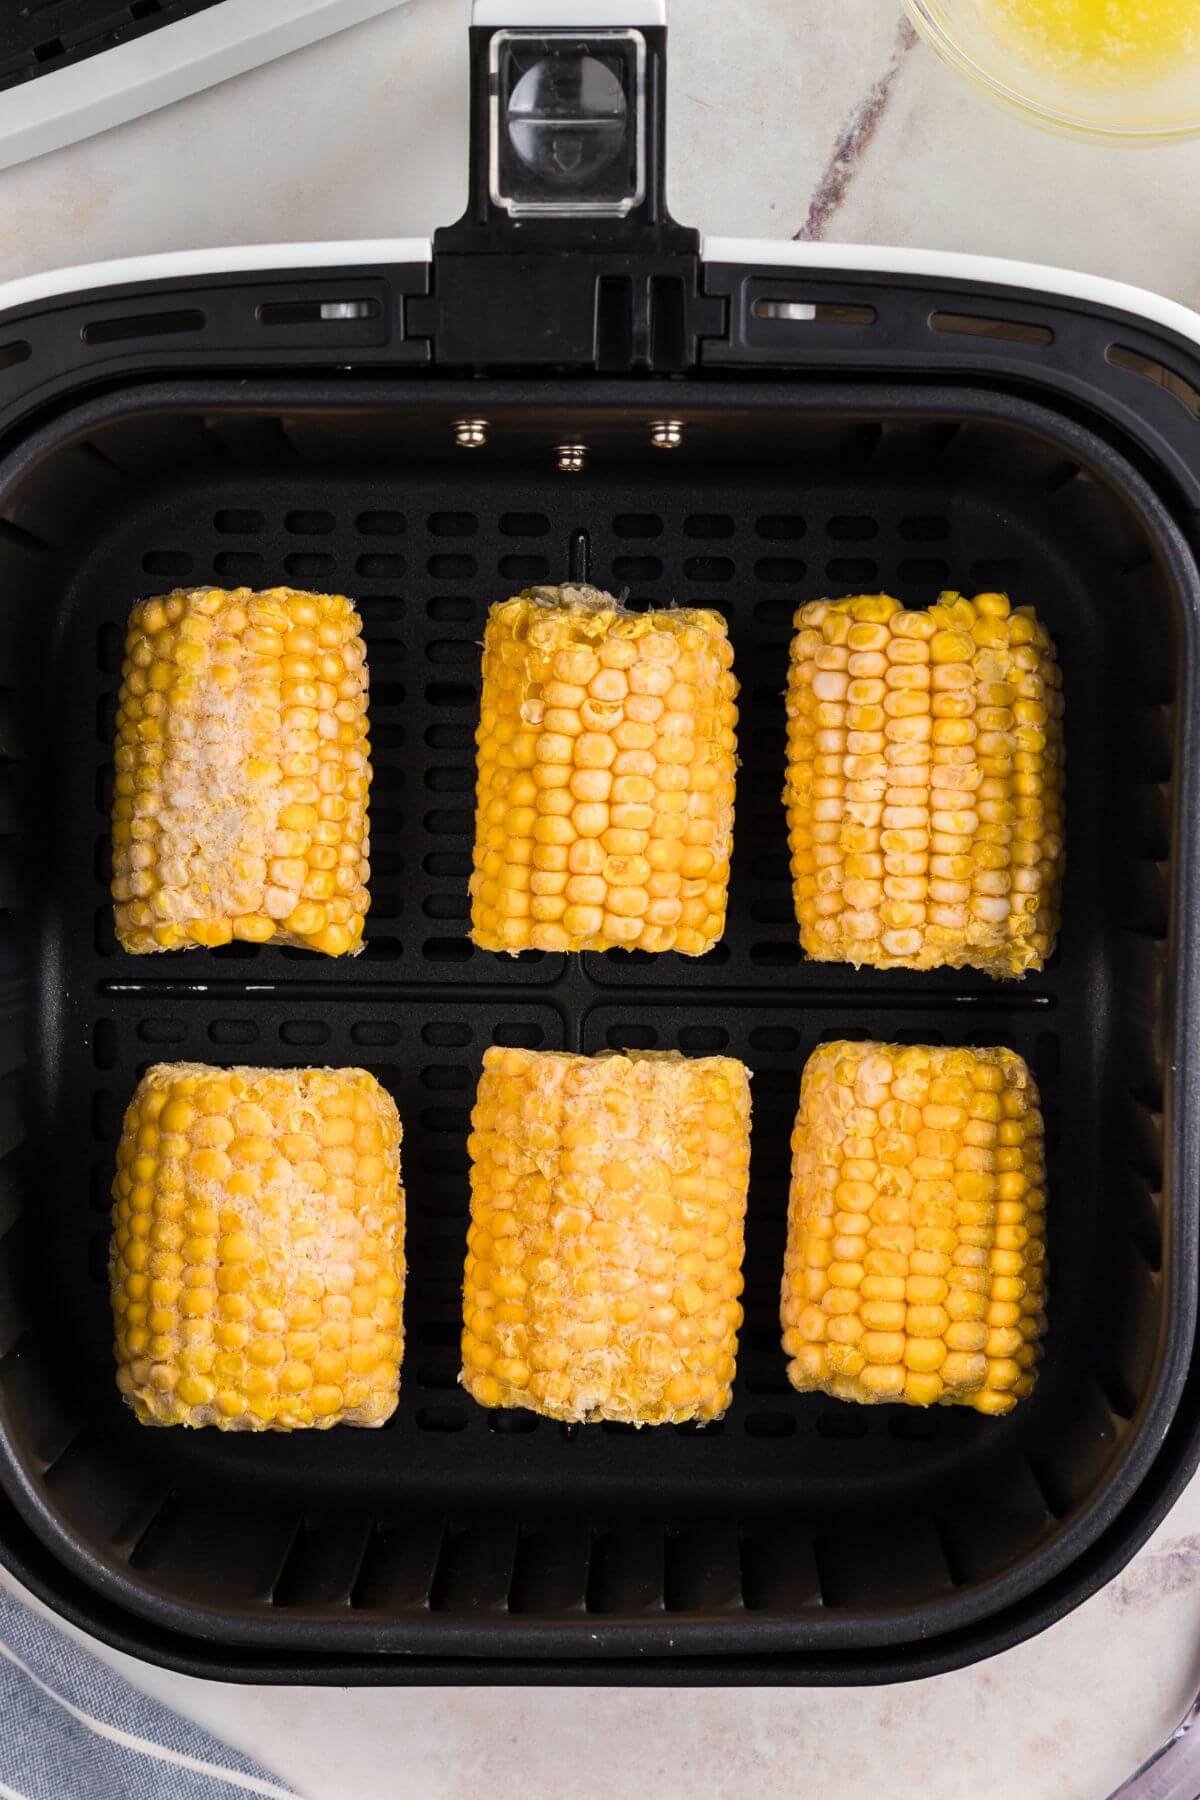 Frozen corn on the cob in the basket. 